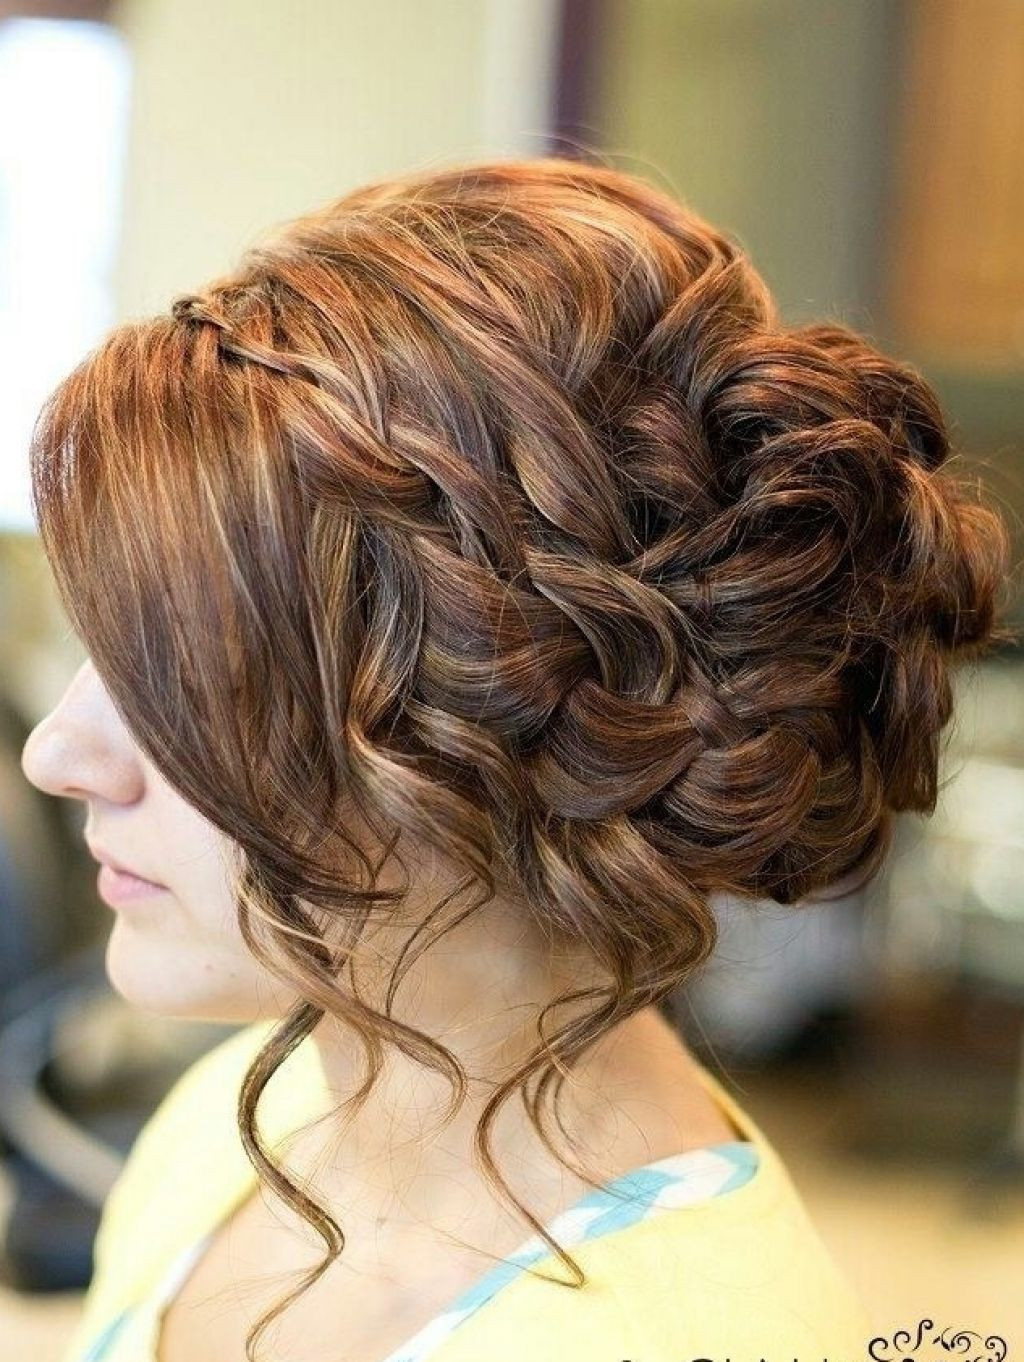 Prom Hairstyles Updos For Long Hair
 14 Prom Hairstyles for Long Hair that are Simply Adorable